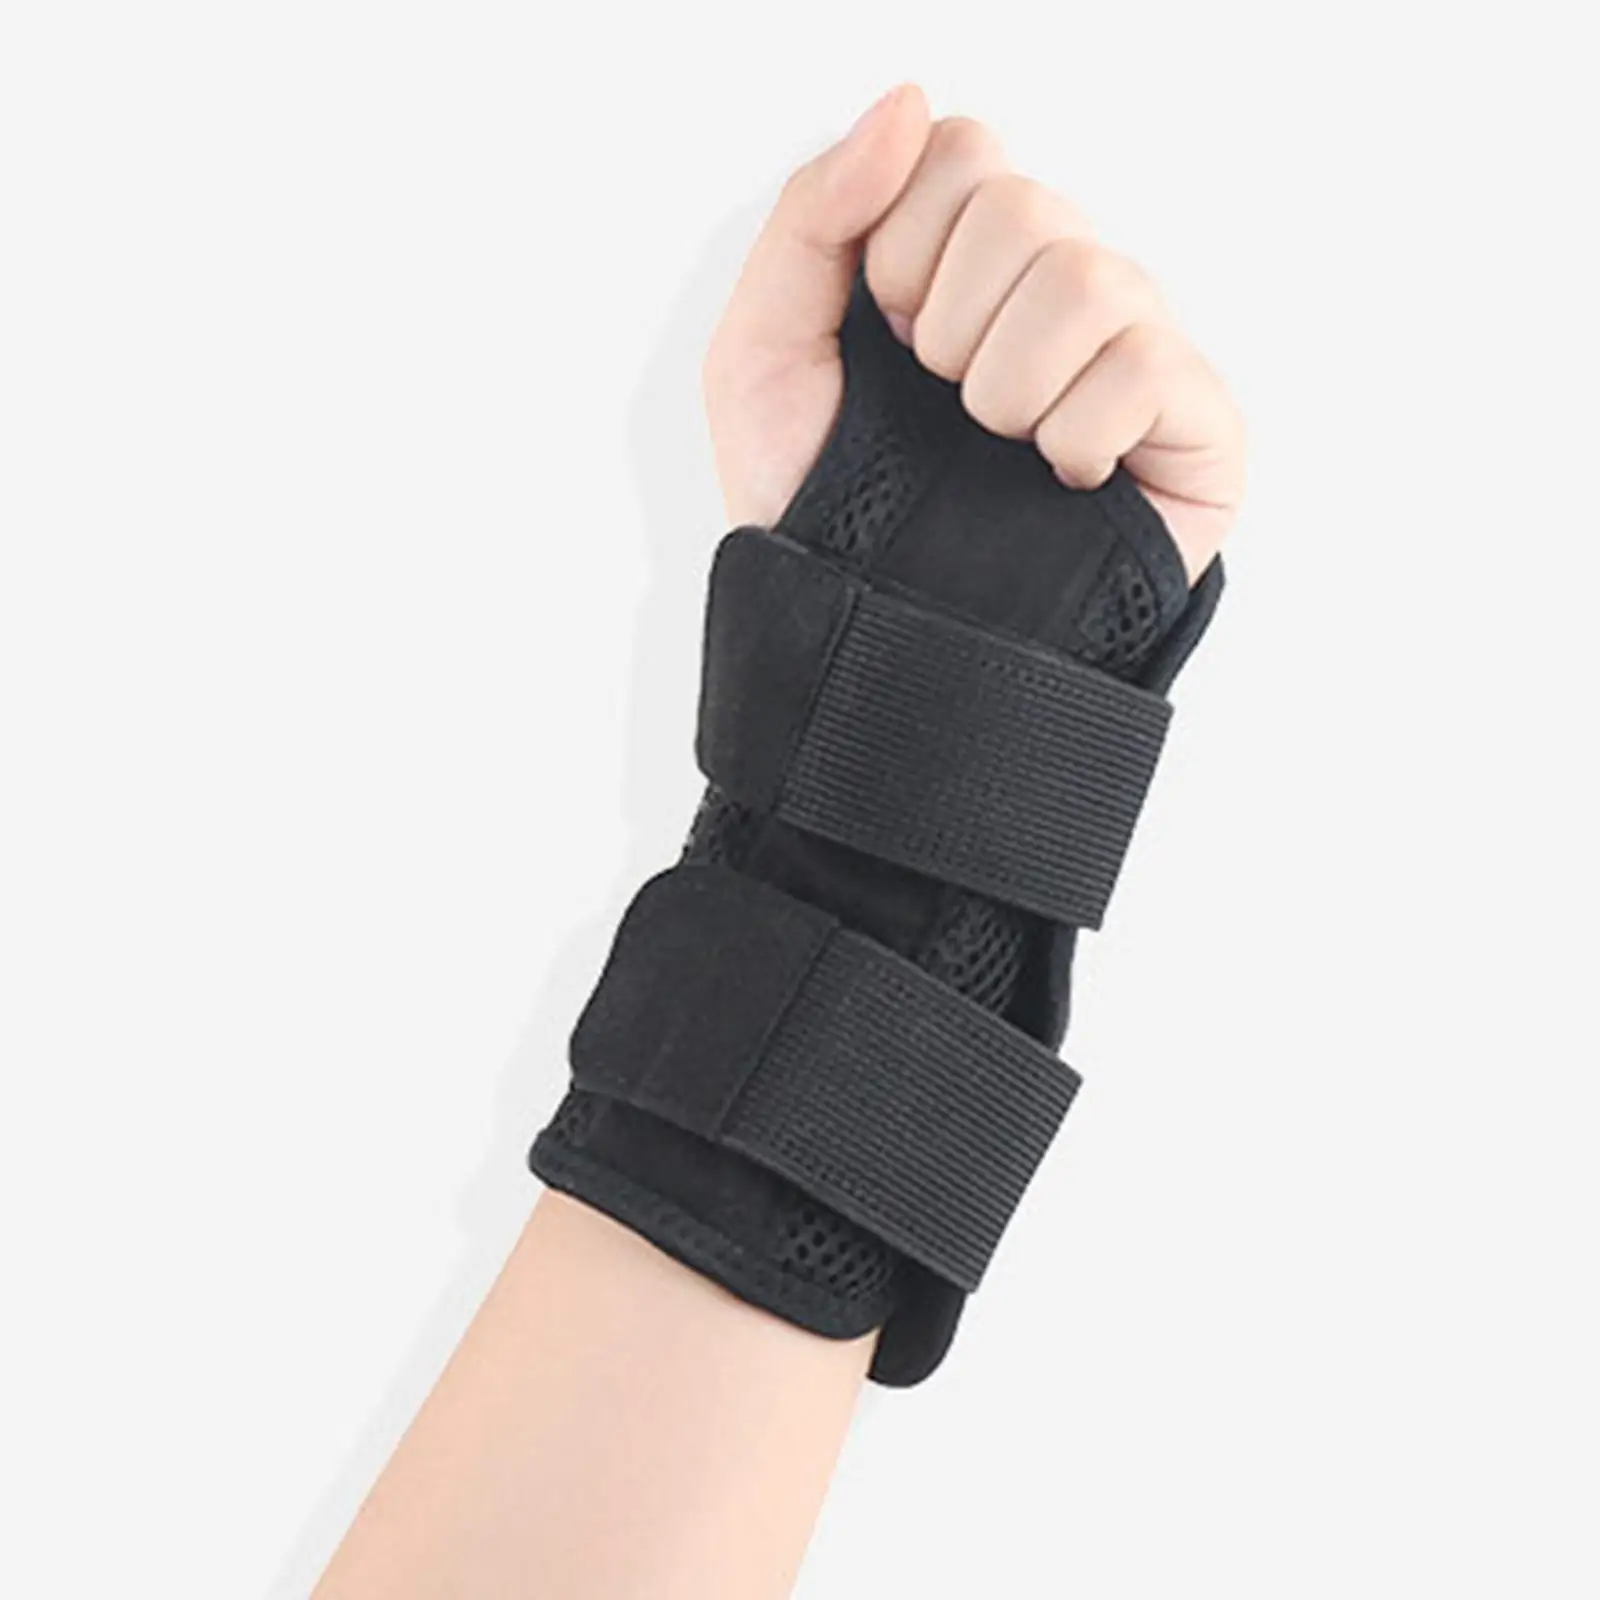 Wrist Hand Brace Stabilizer Strains Thumb Sprains Arthritis Wrist Hands Splint Wrist Hand Brace for Pain Relieve Support Sports